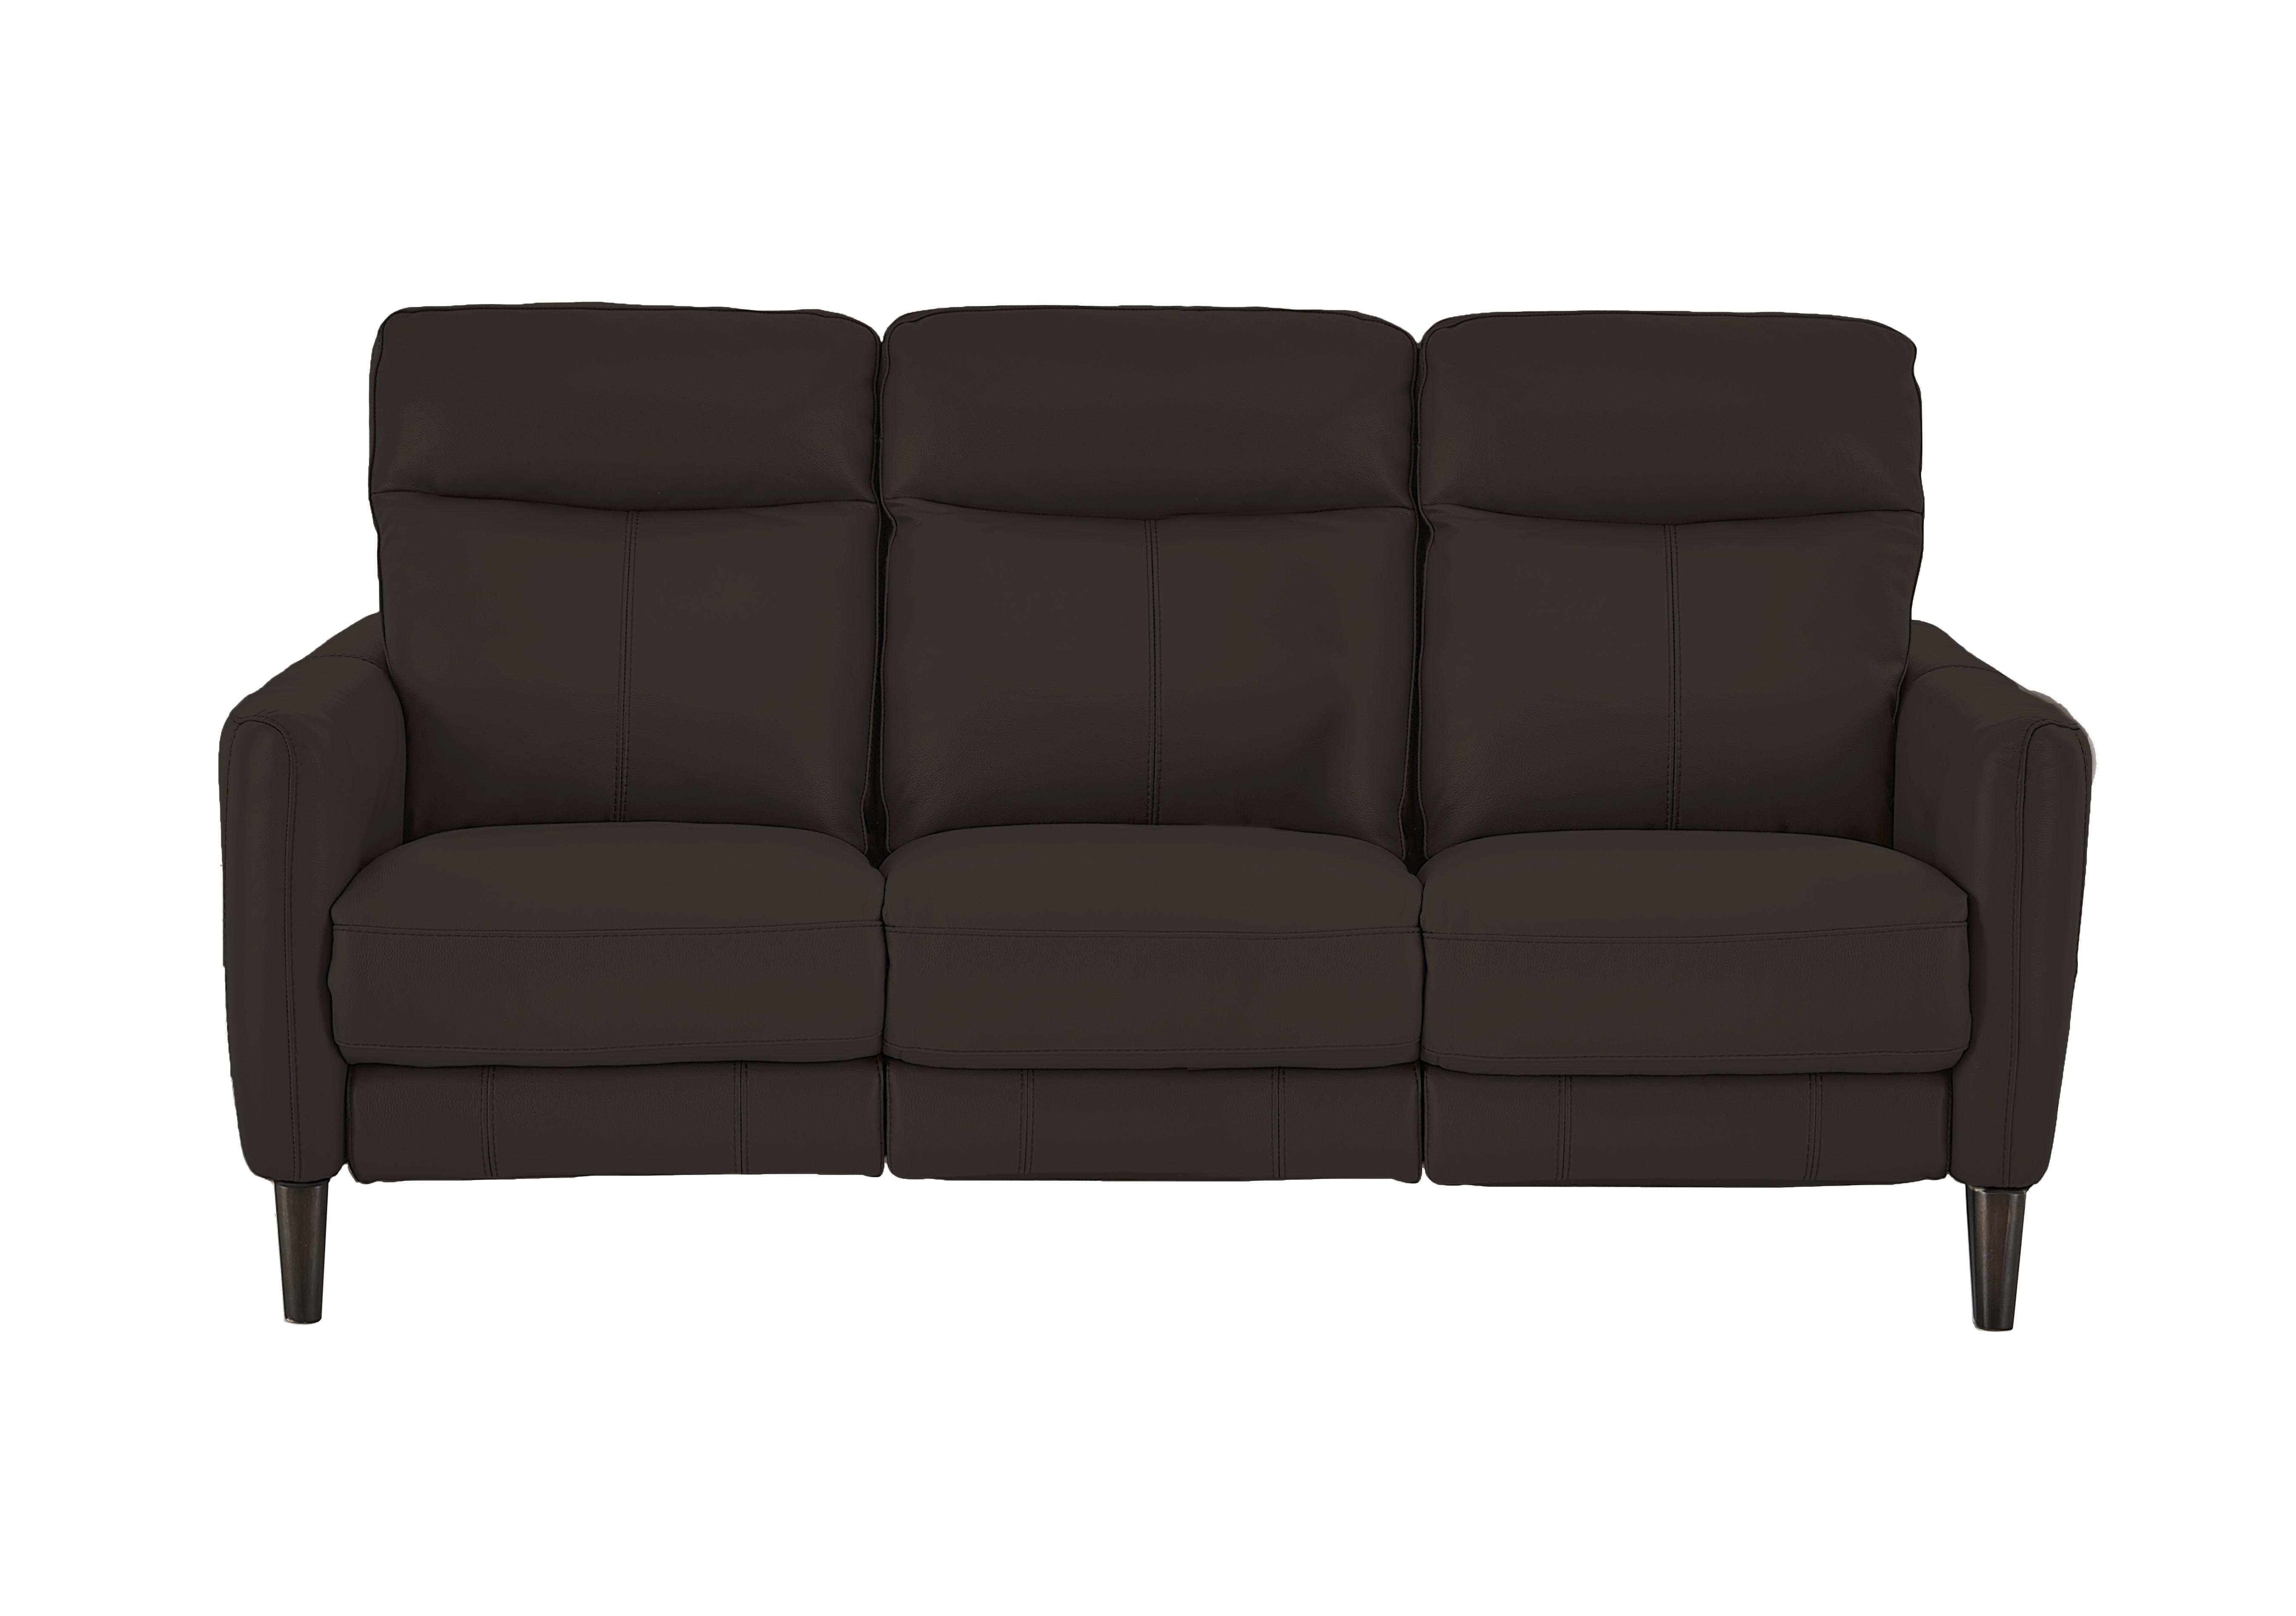 Compact Collection Petit 3 Seater Leather Sofa in Bv-1748 Dark Chocolate on Furniture Village